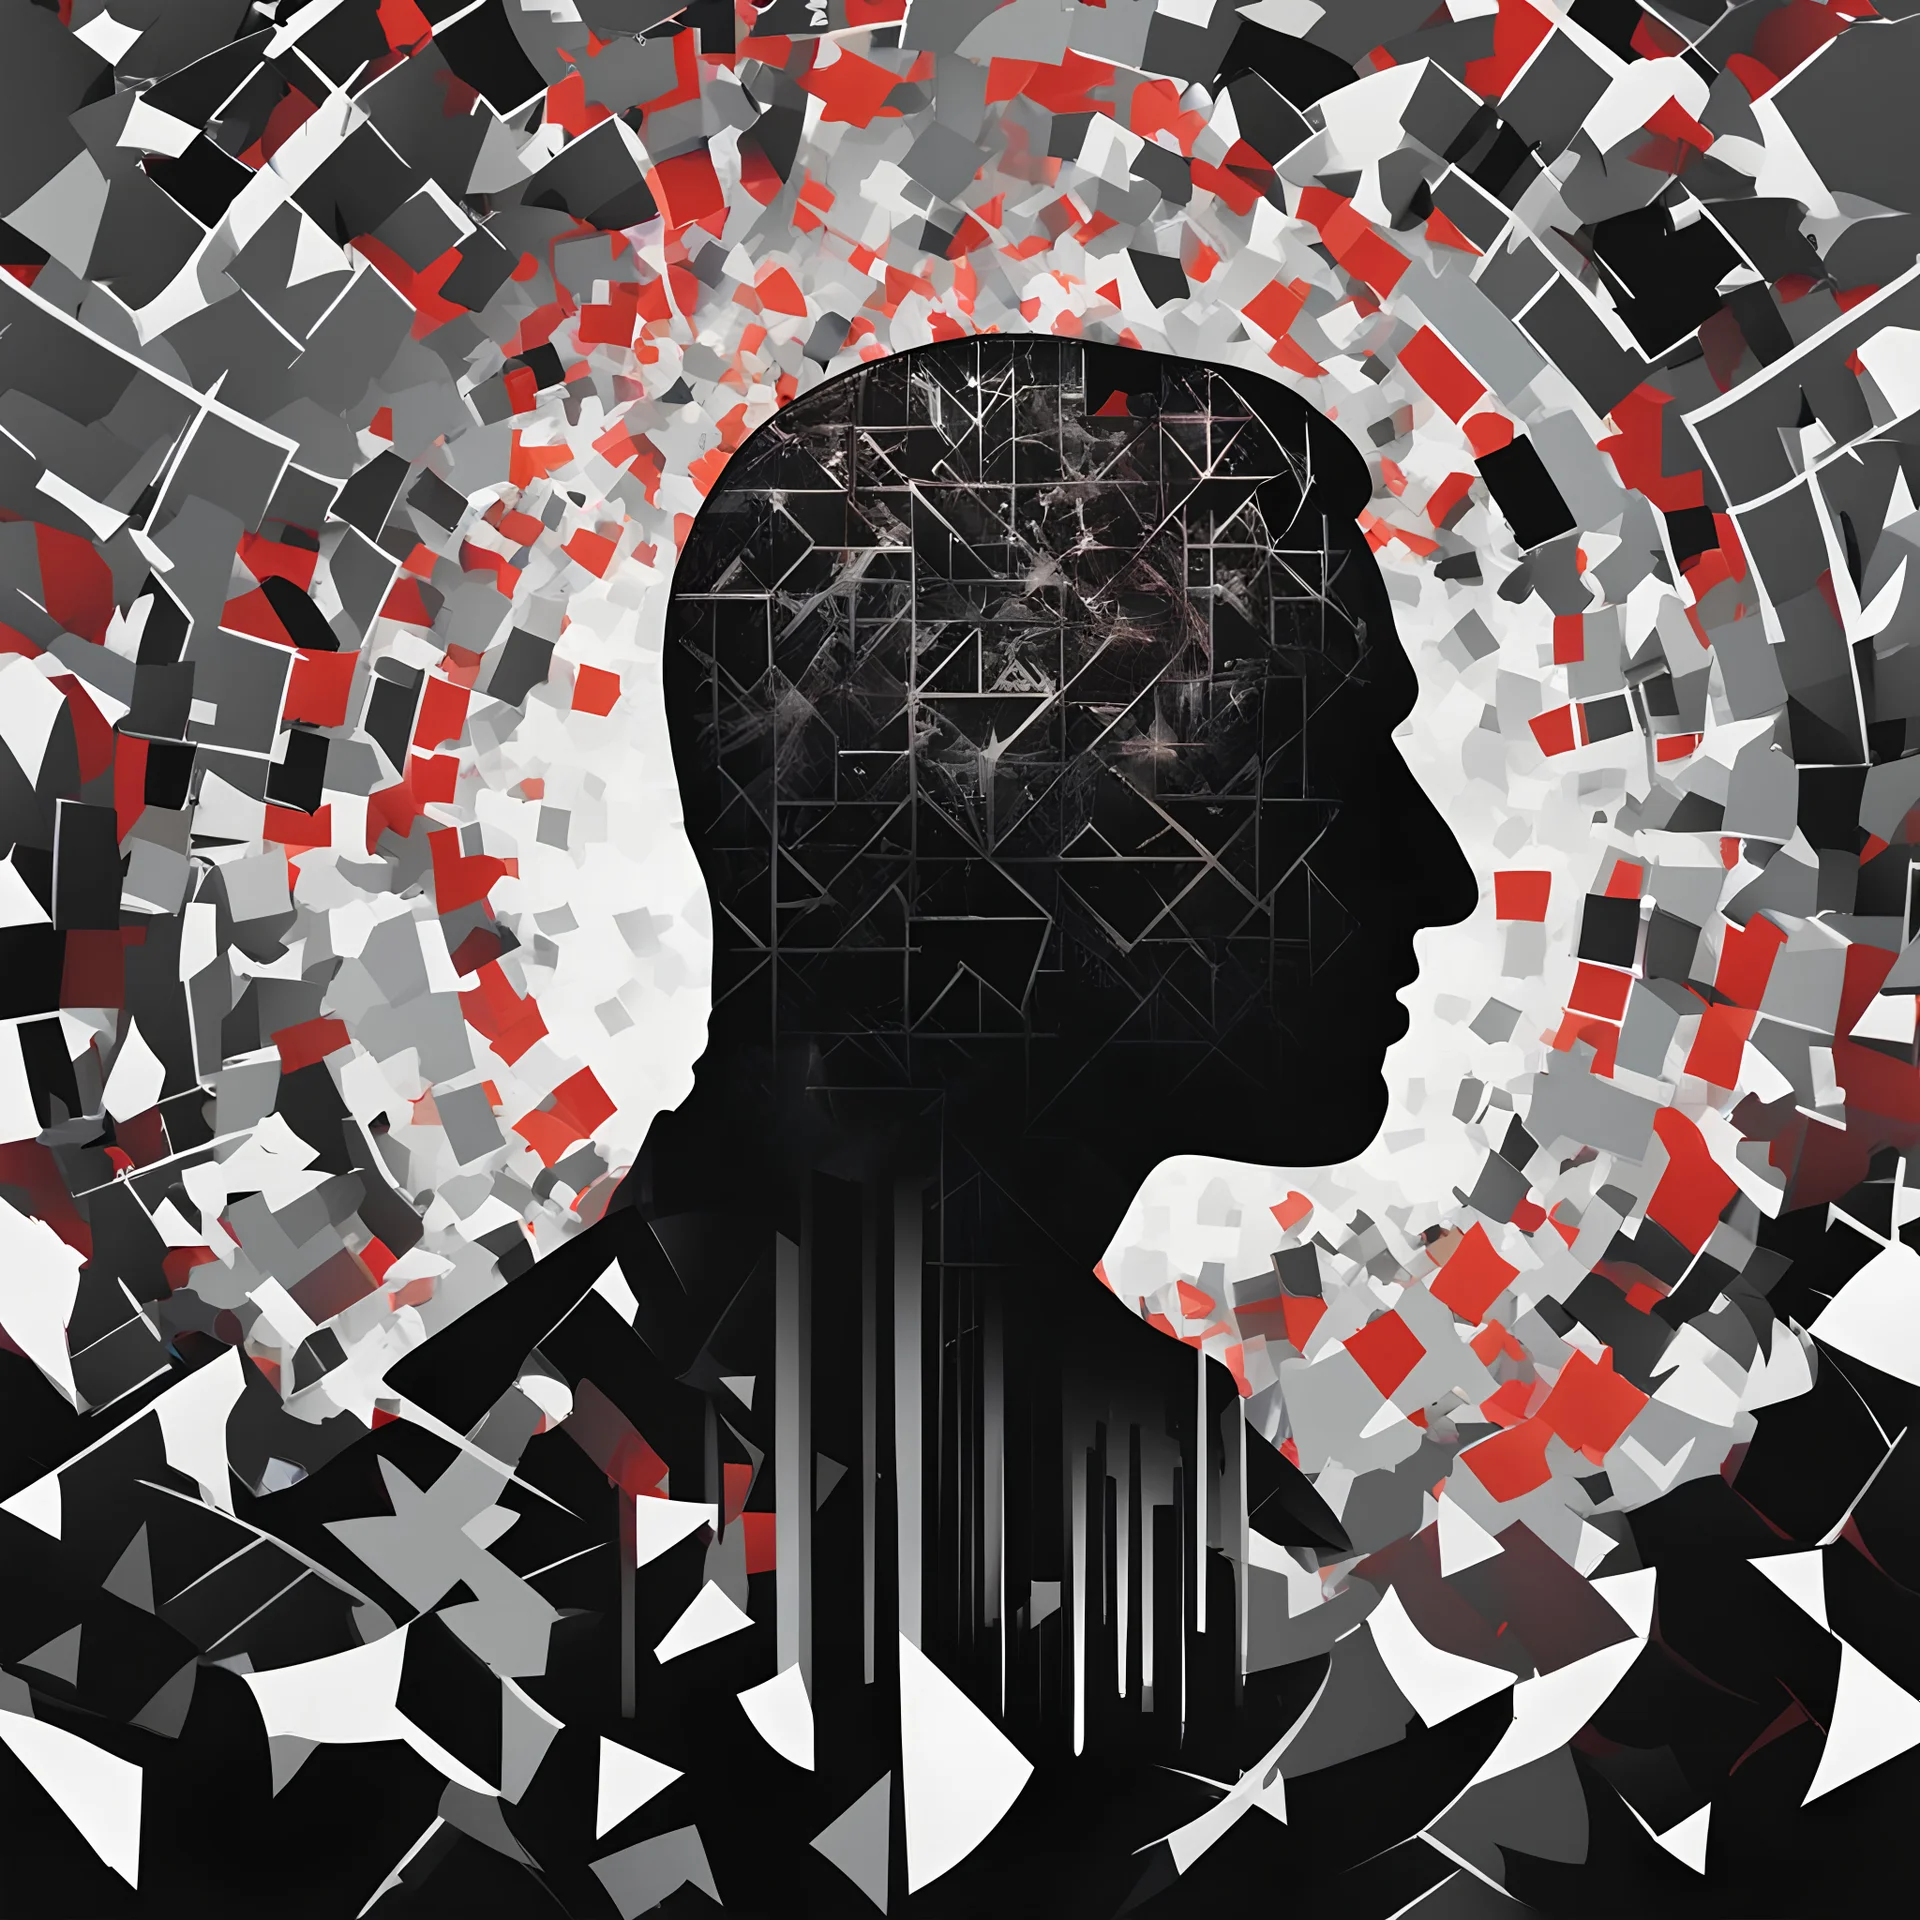 **Cinematic Illustrations:** A silhouette of a person’s head filled with a chaotic, abstract pattern. This represents the extremist mindset and the radicalization process. **Appearance:** cinematic portraits can be interpreted in multiple ways, adding depth and intrigue to the narrative. They collectively provide a comprehensive and captivating exploration of the complex issues surrounding terrorism, extremism, and radicalization.